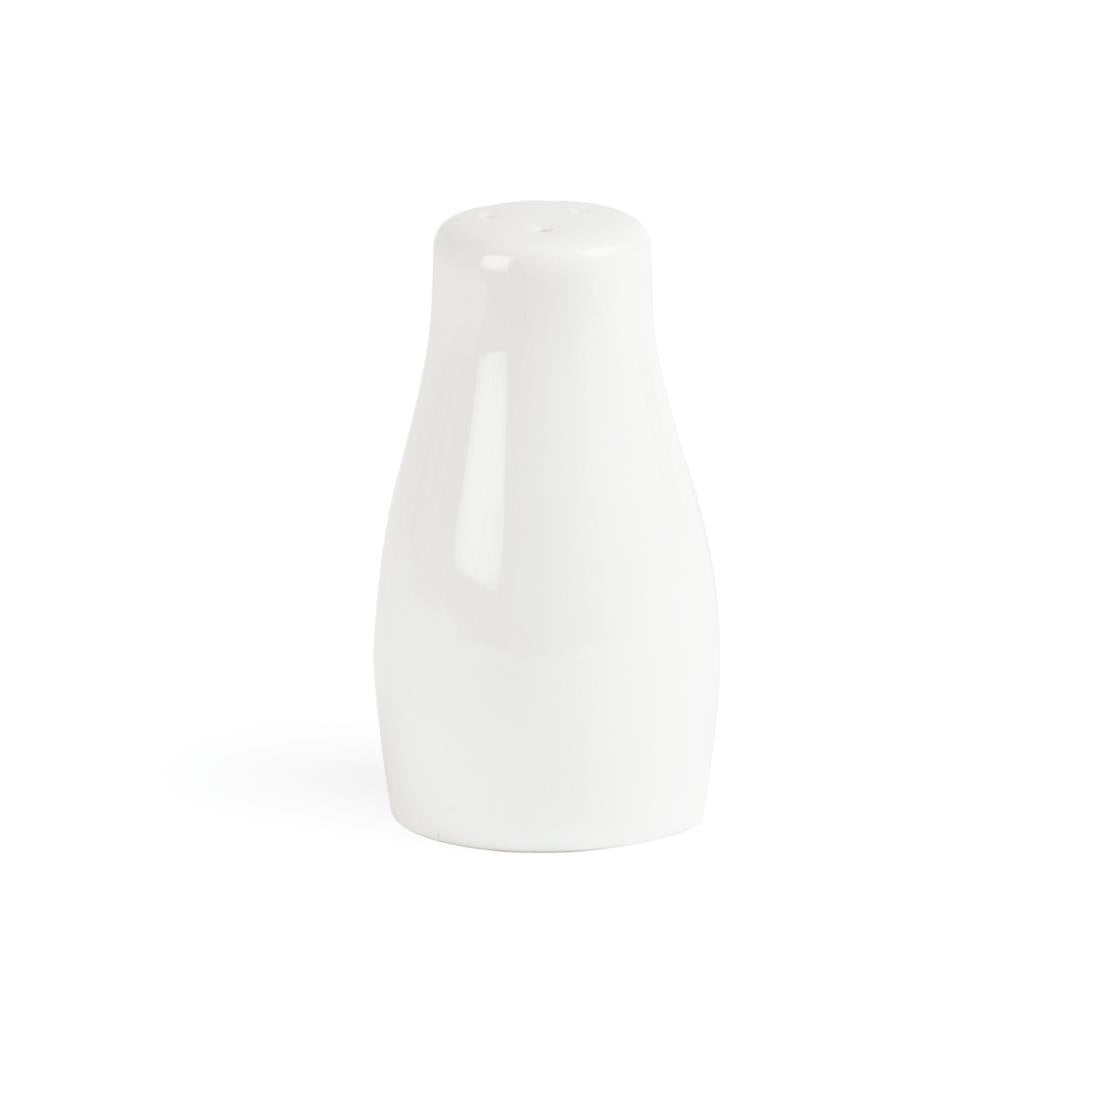 C213 Olympia Whiteware Salt Shakers 90mm (Pack of 12)